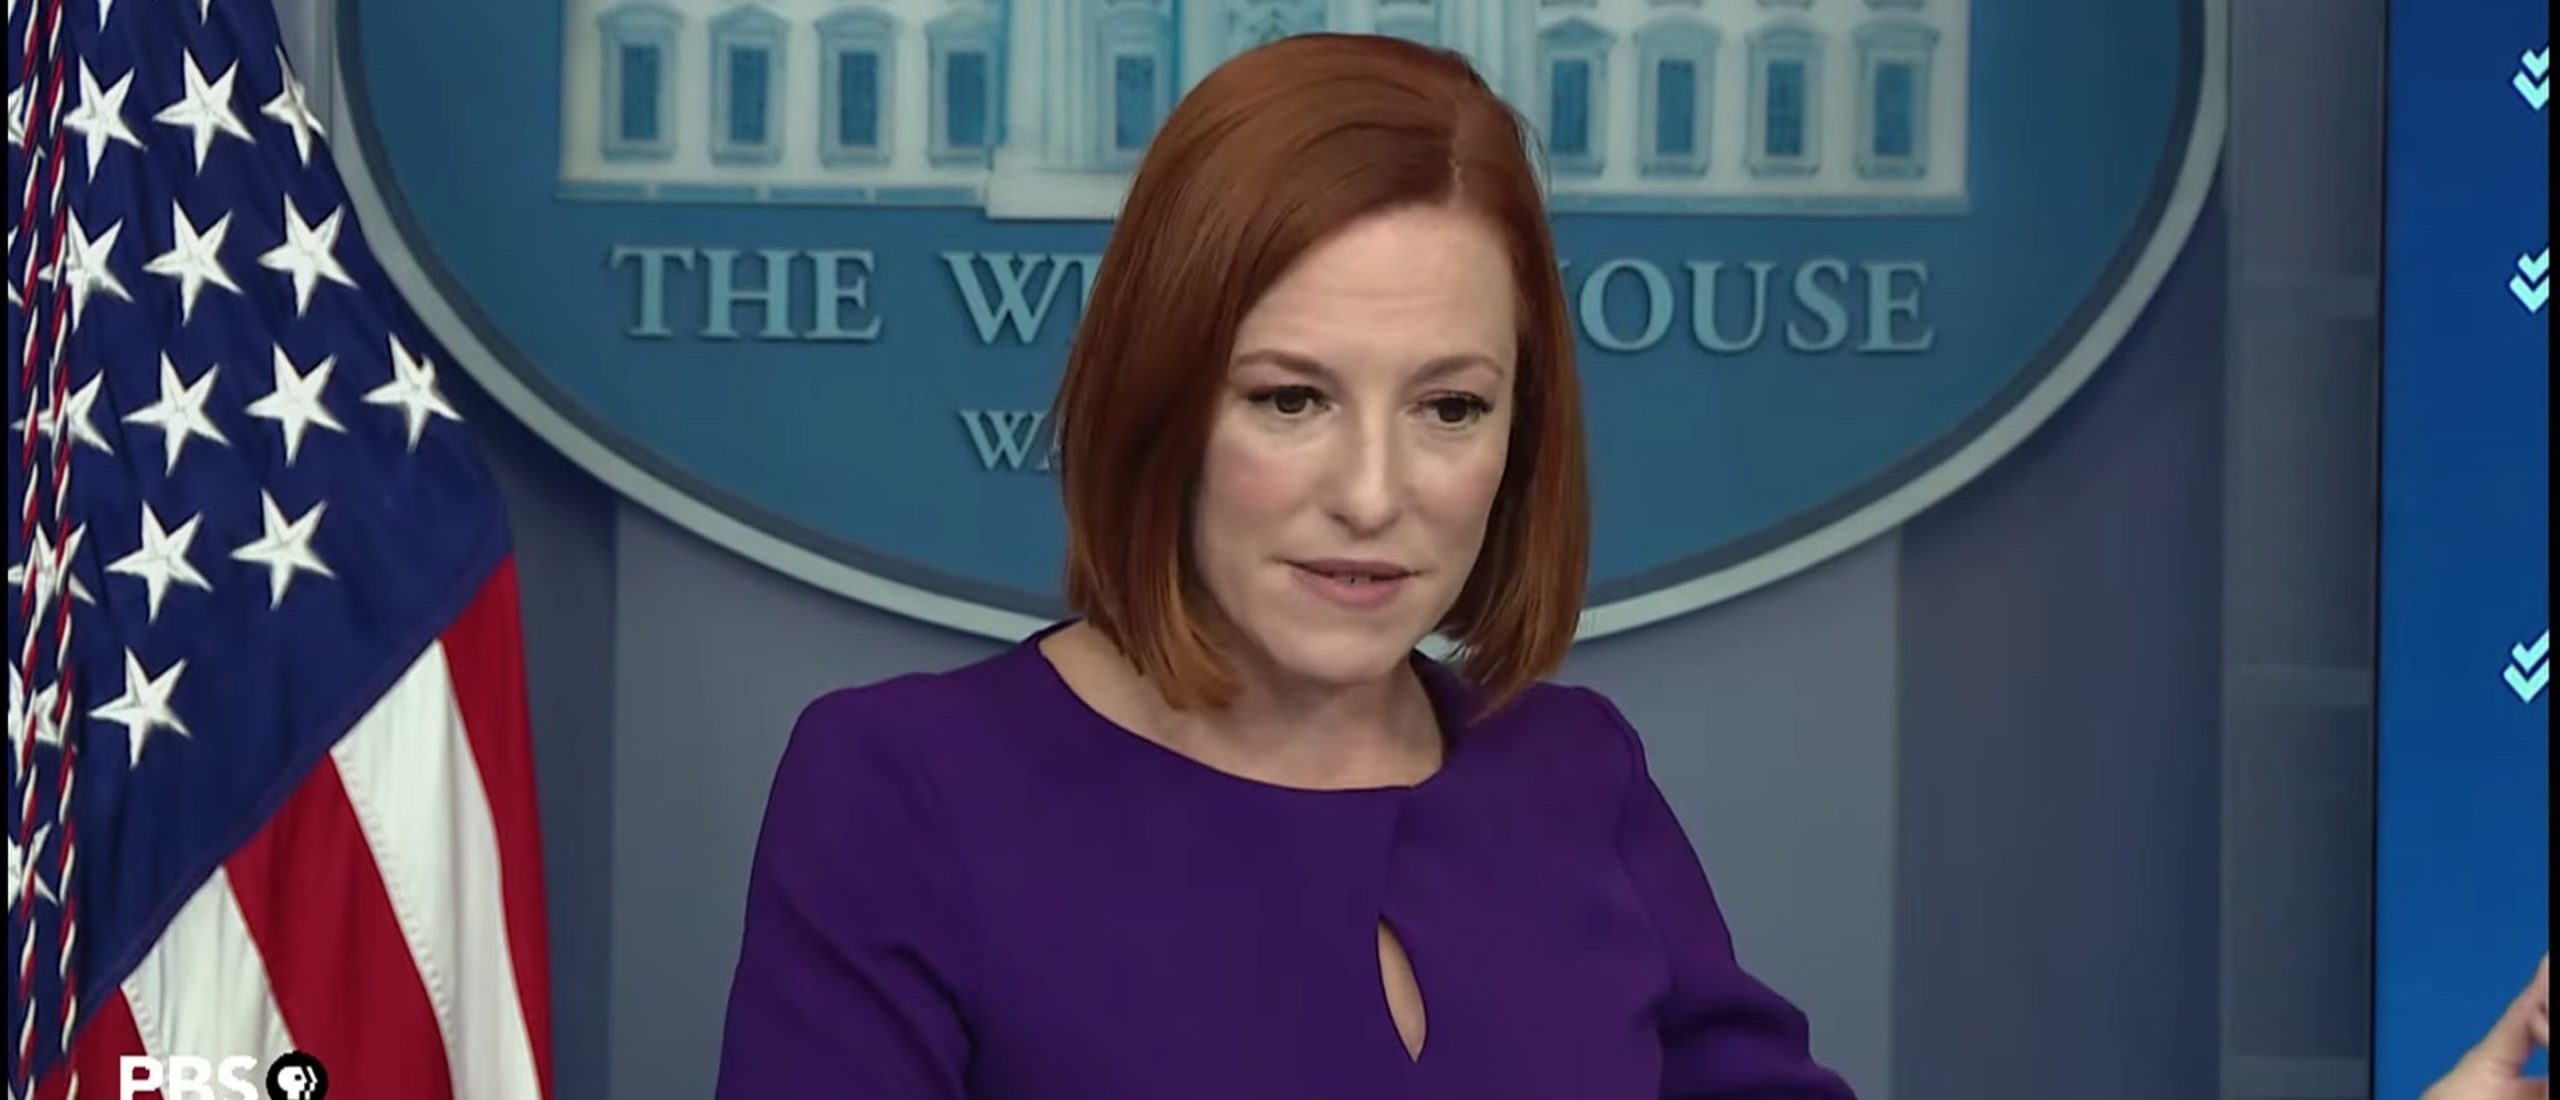 Psaki Says Higher Gas Prices Show Need For Green Transition